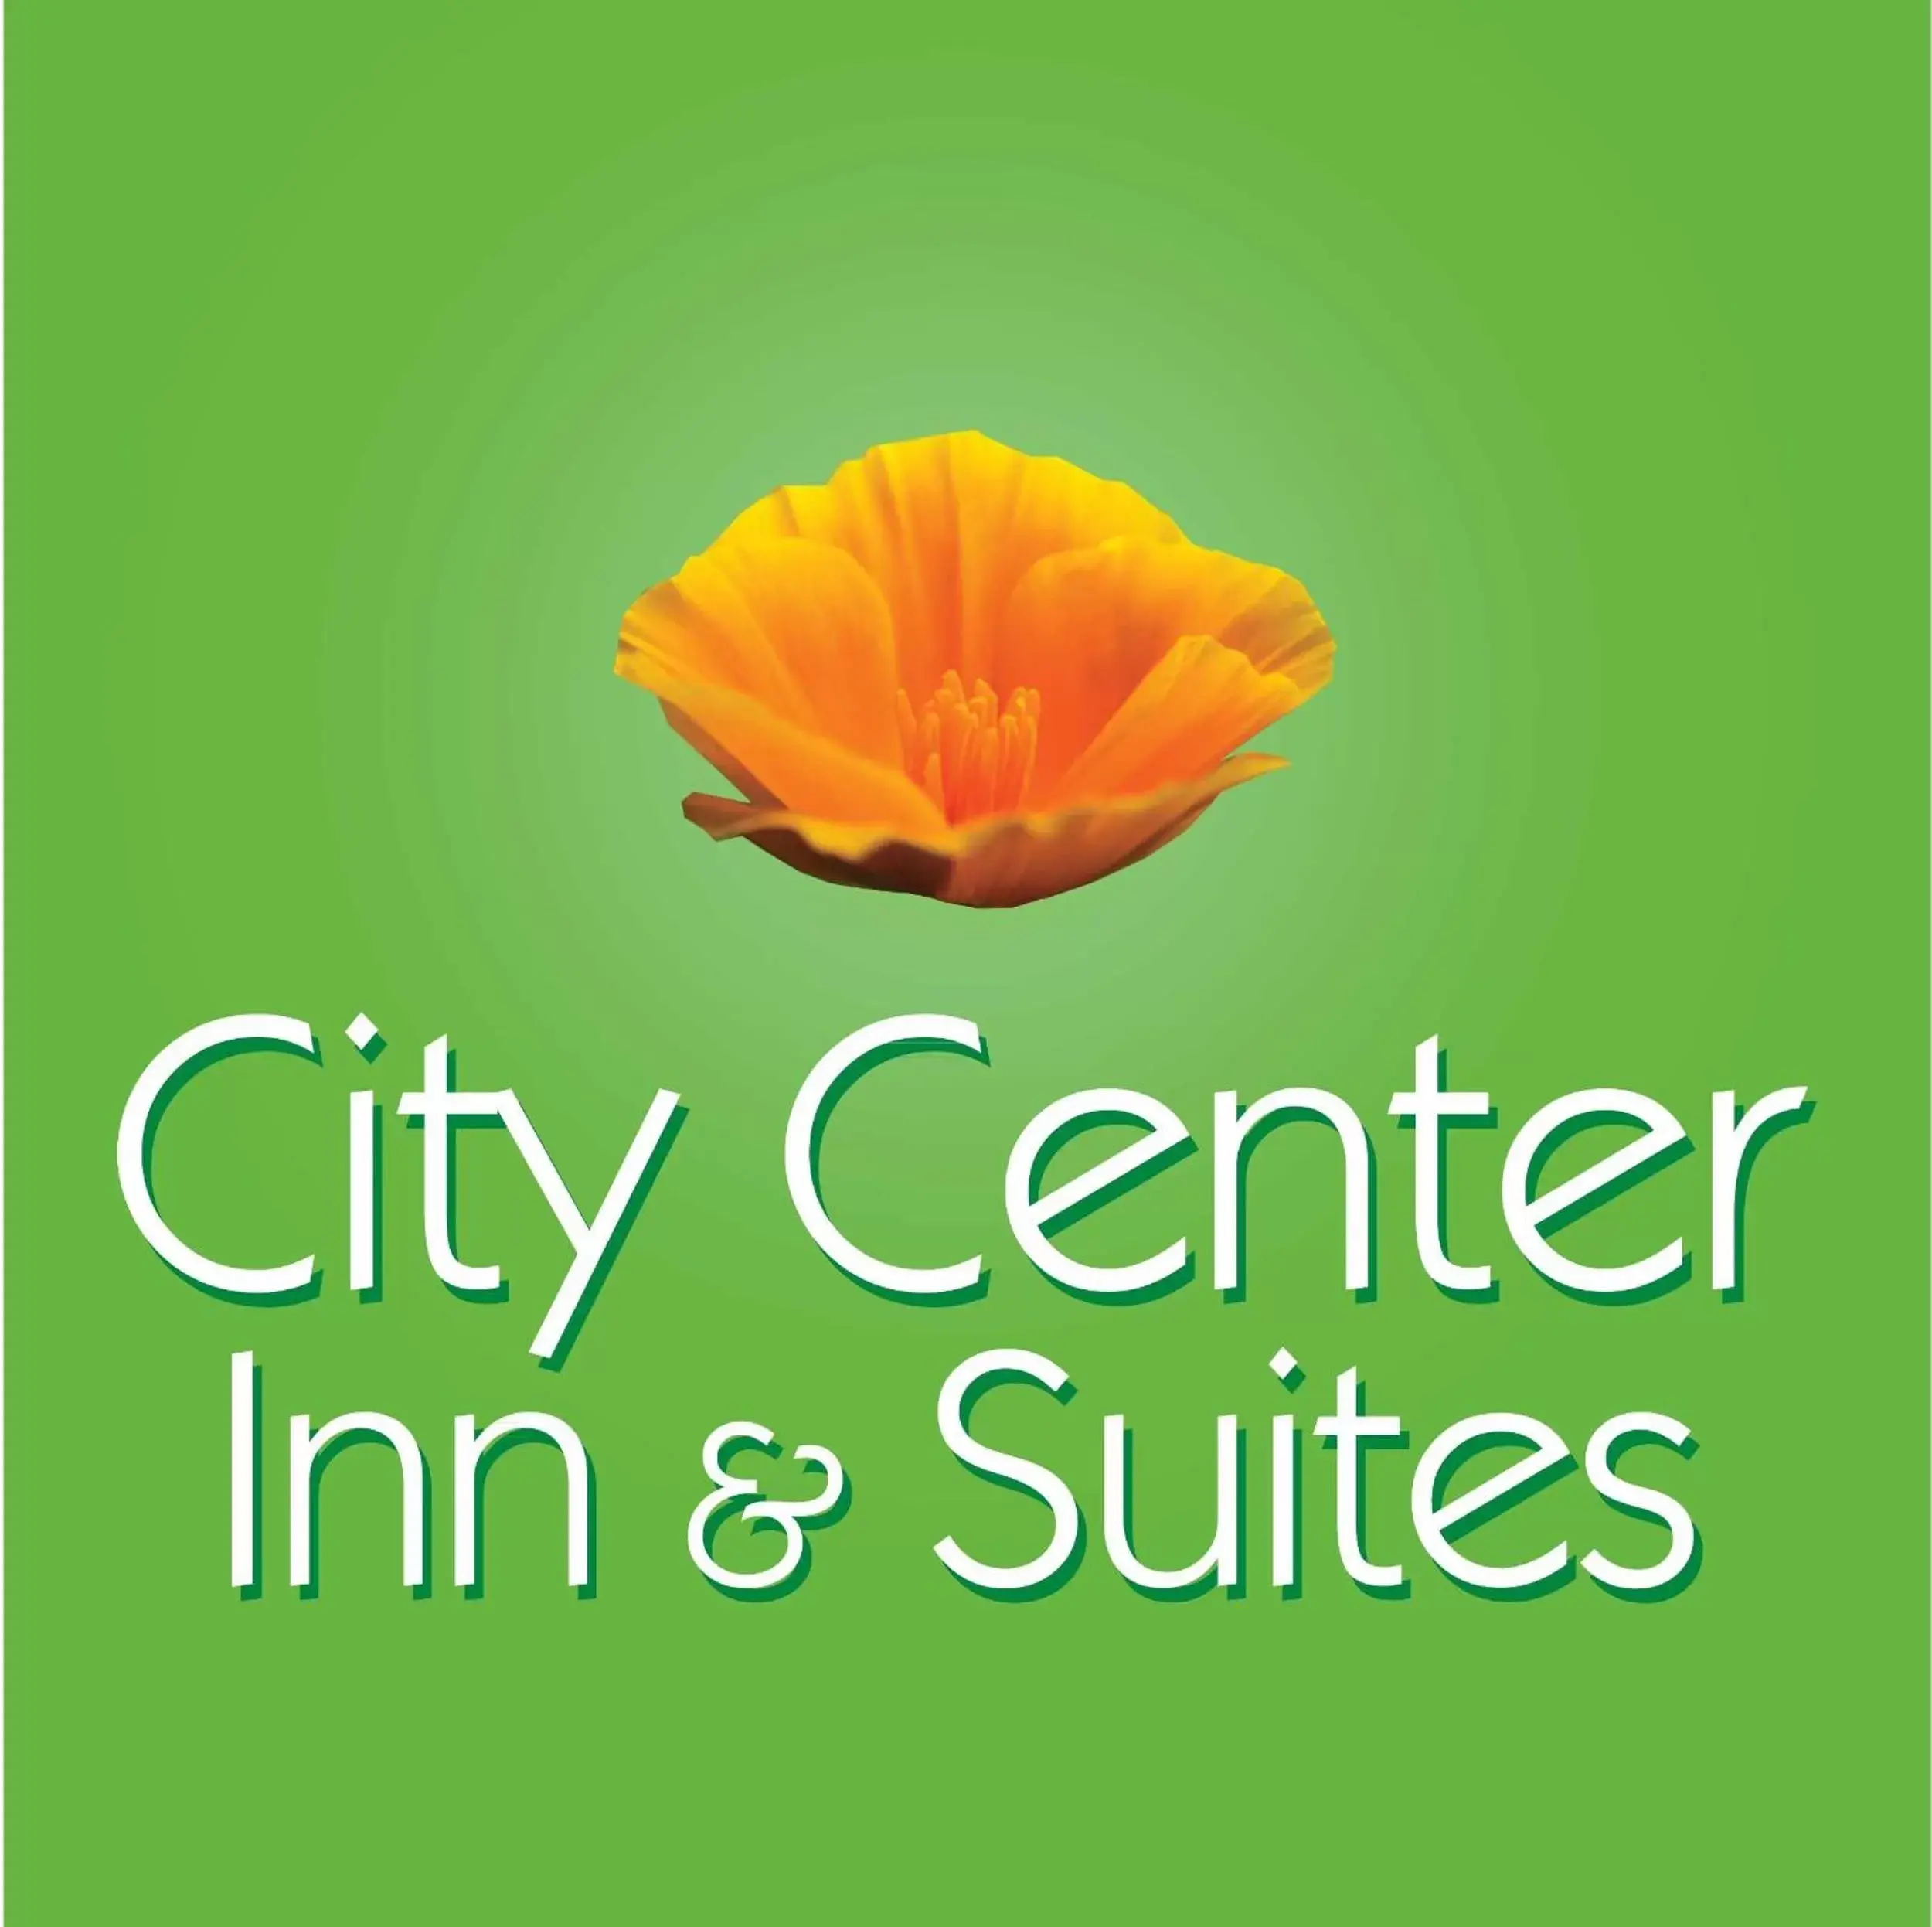 Property logo or sign in City Center Inn and Suites